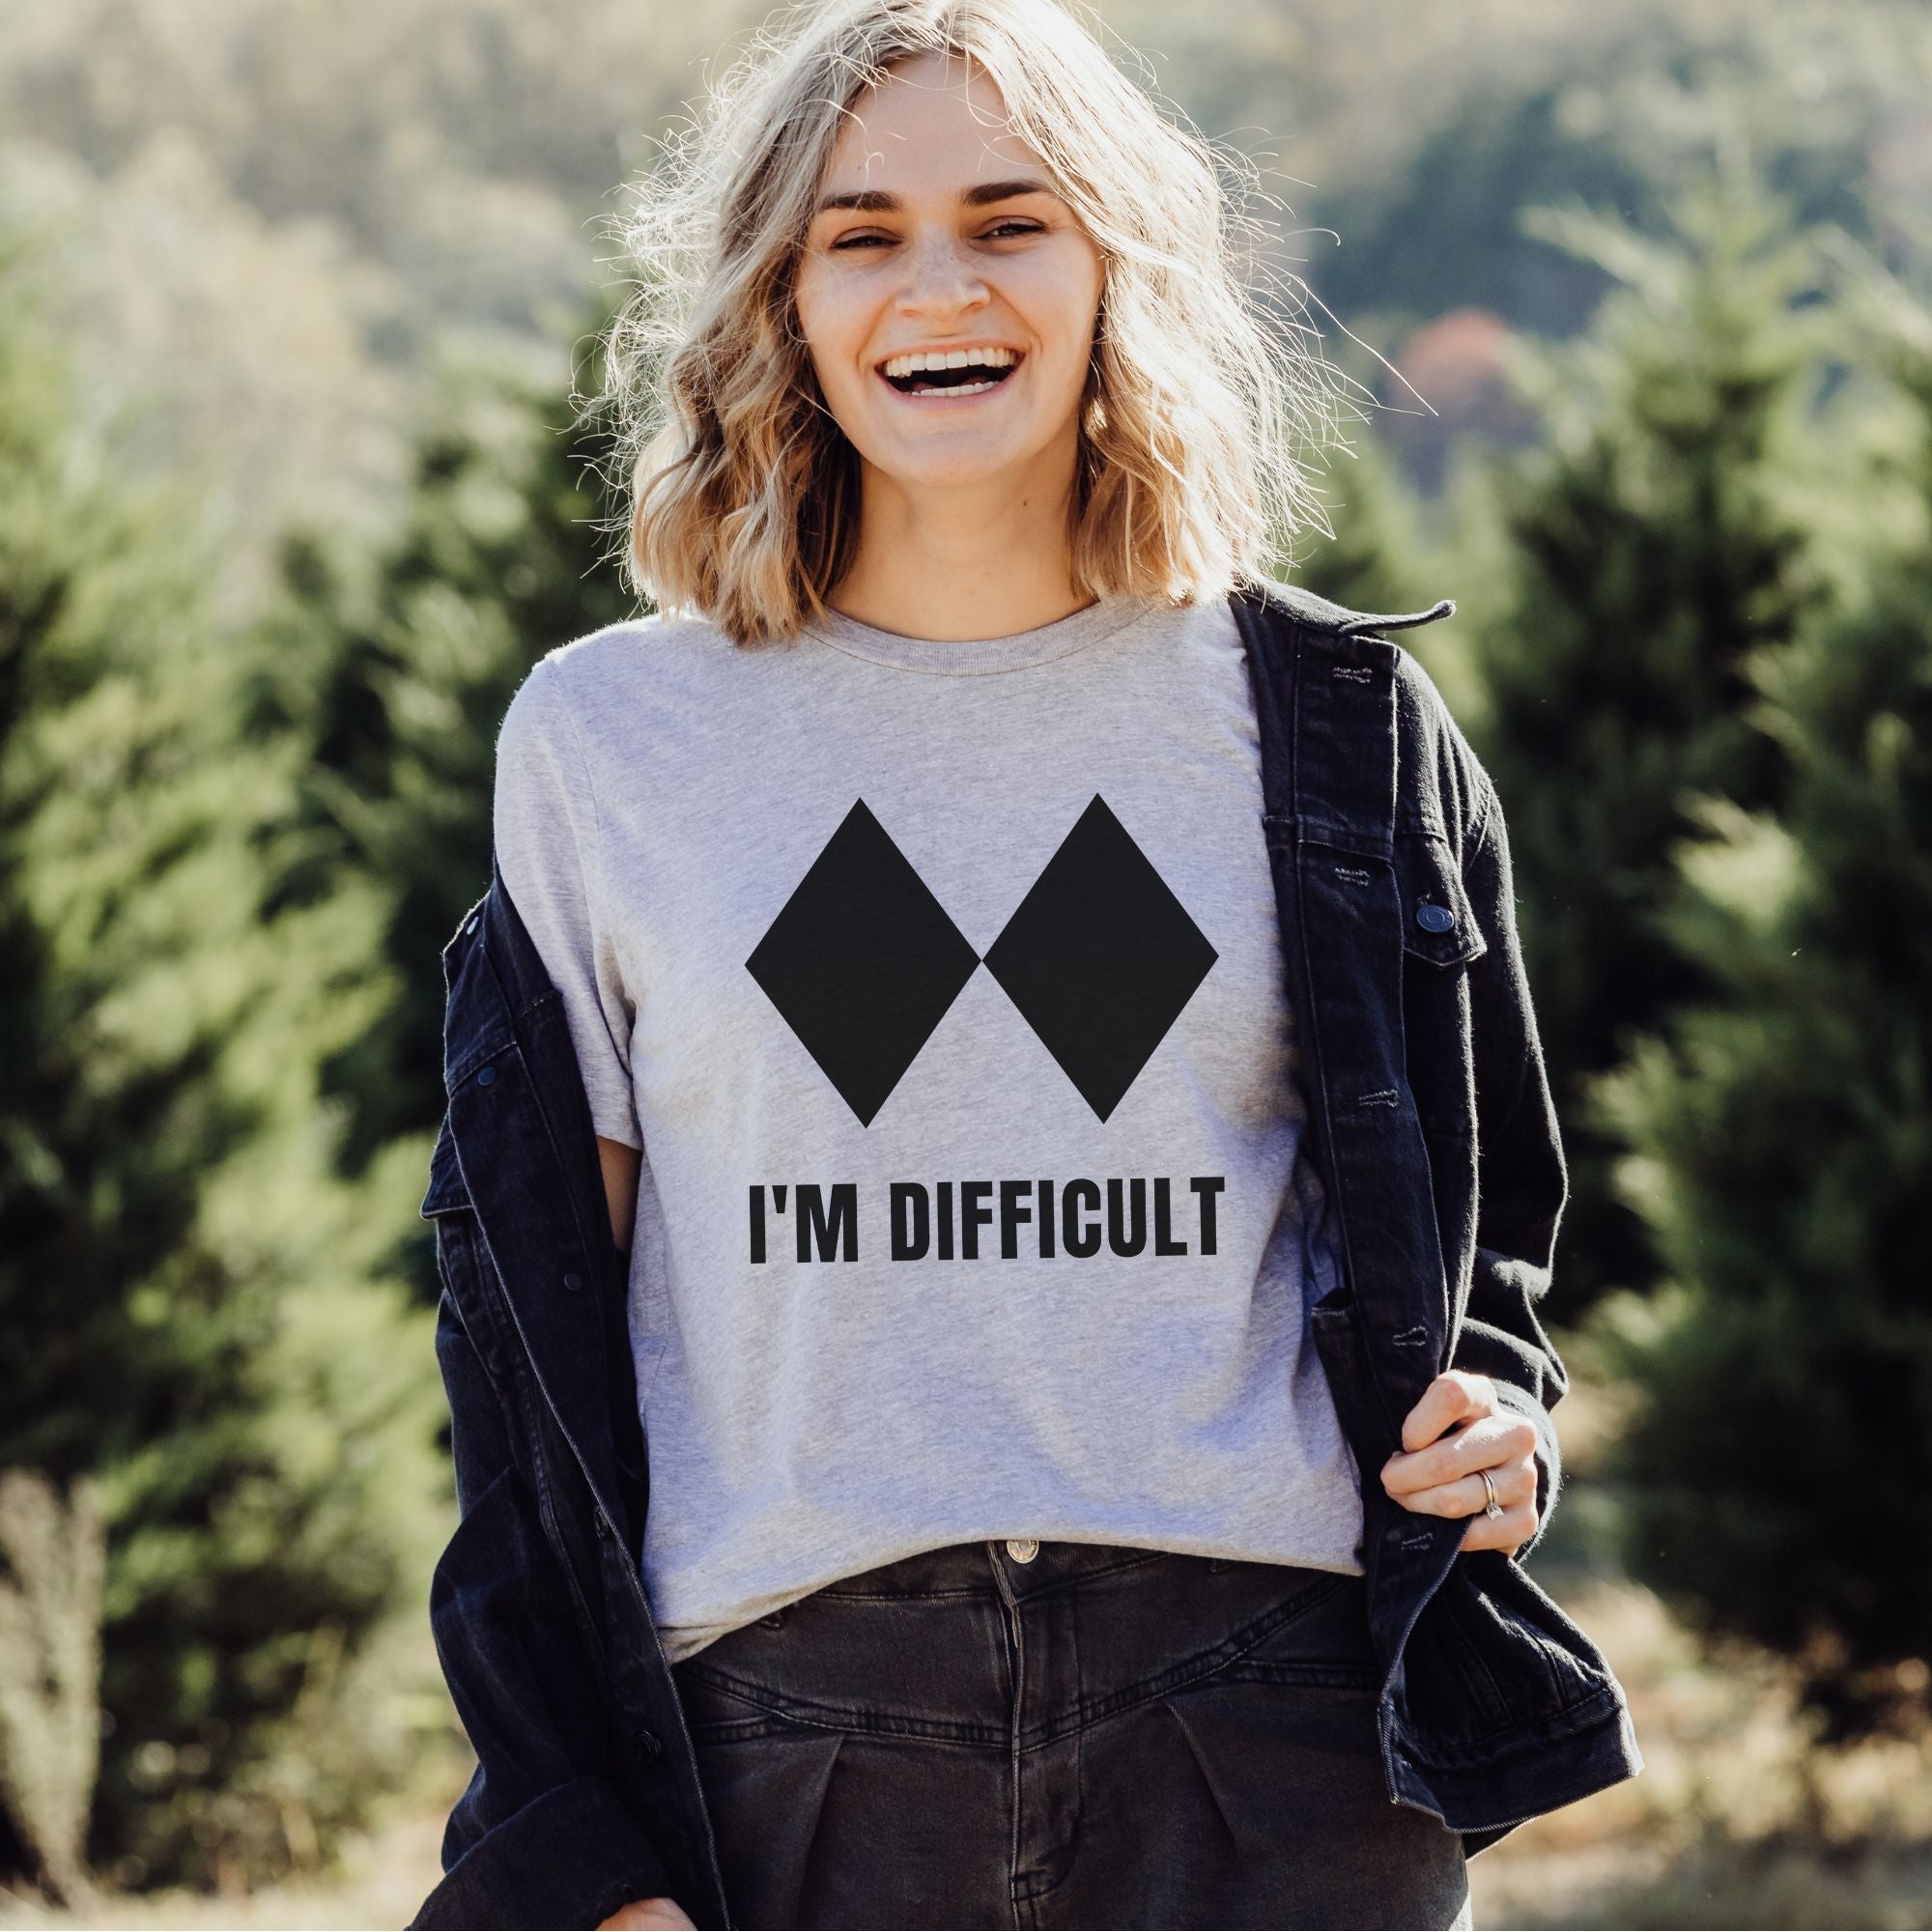 I'm Difficult Funny Skiing Shirt *UNISEX FIT*-208 Tees Wholesale, Idaho